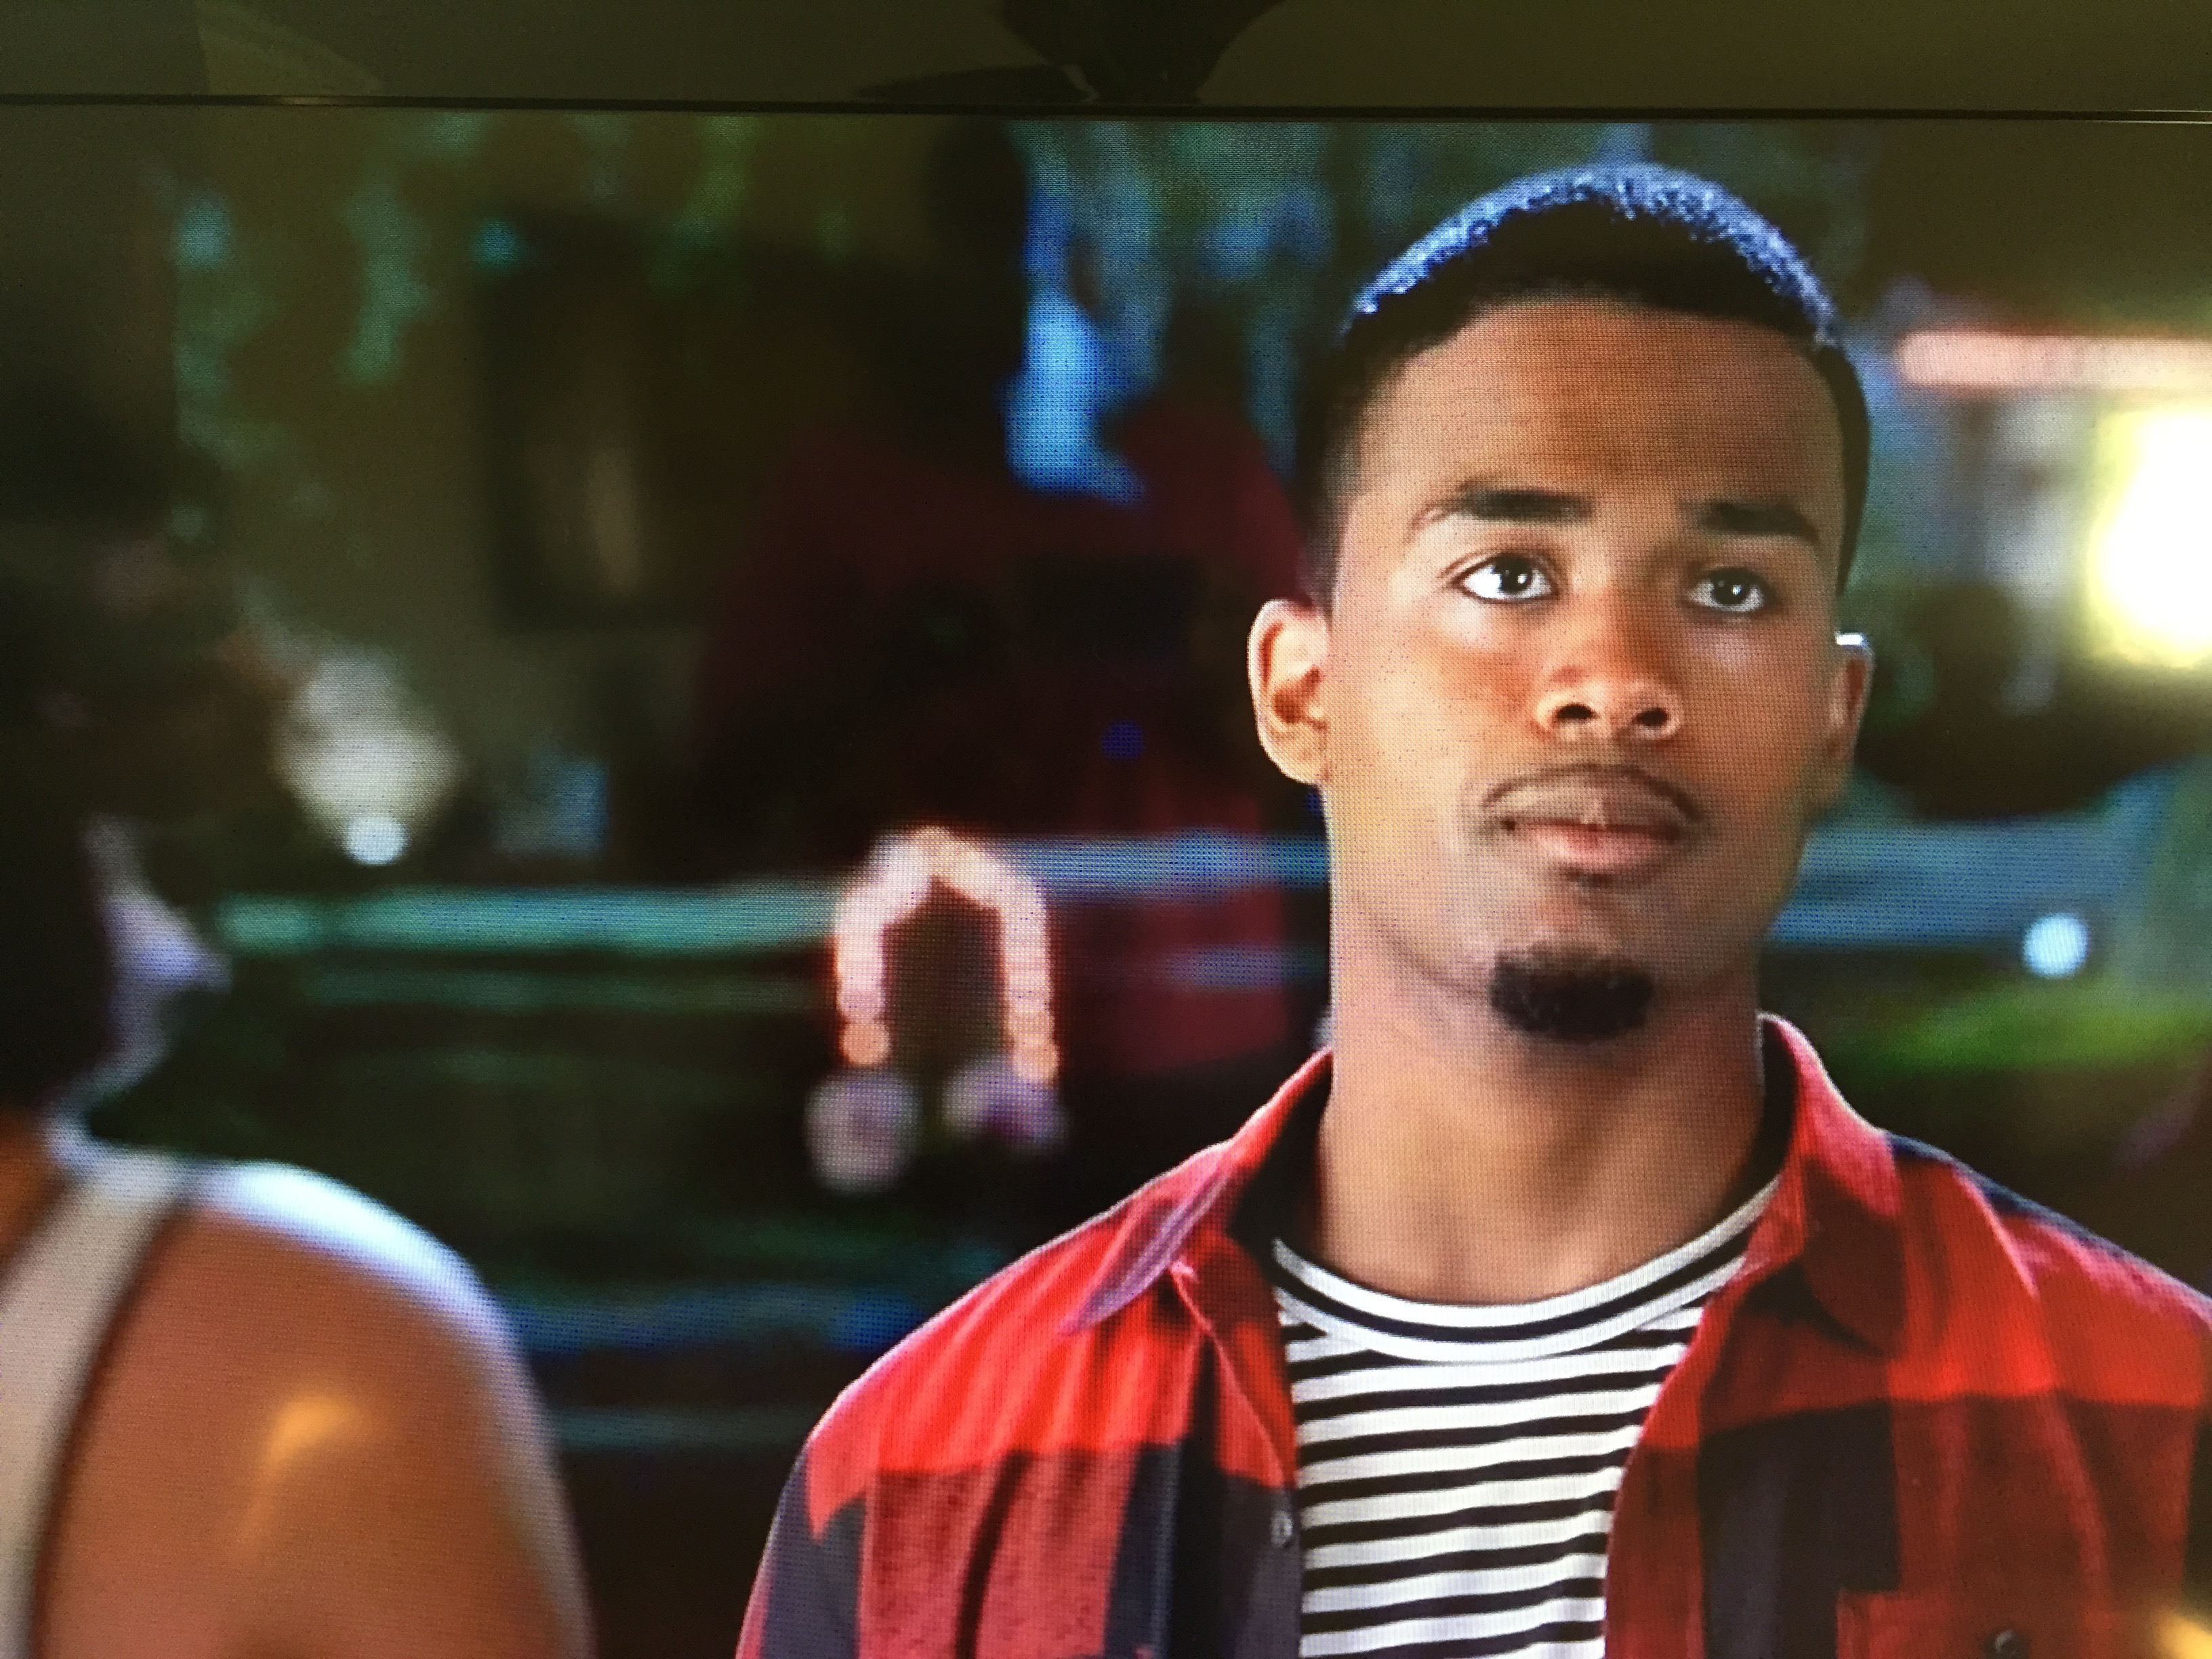 Darnell J. Cates as Juvon on Black'ish episode #206 